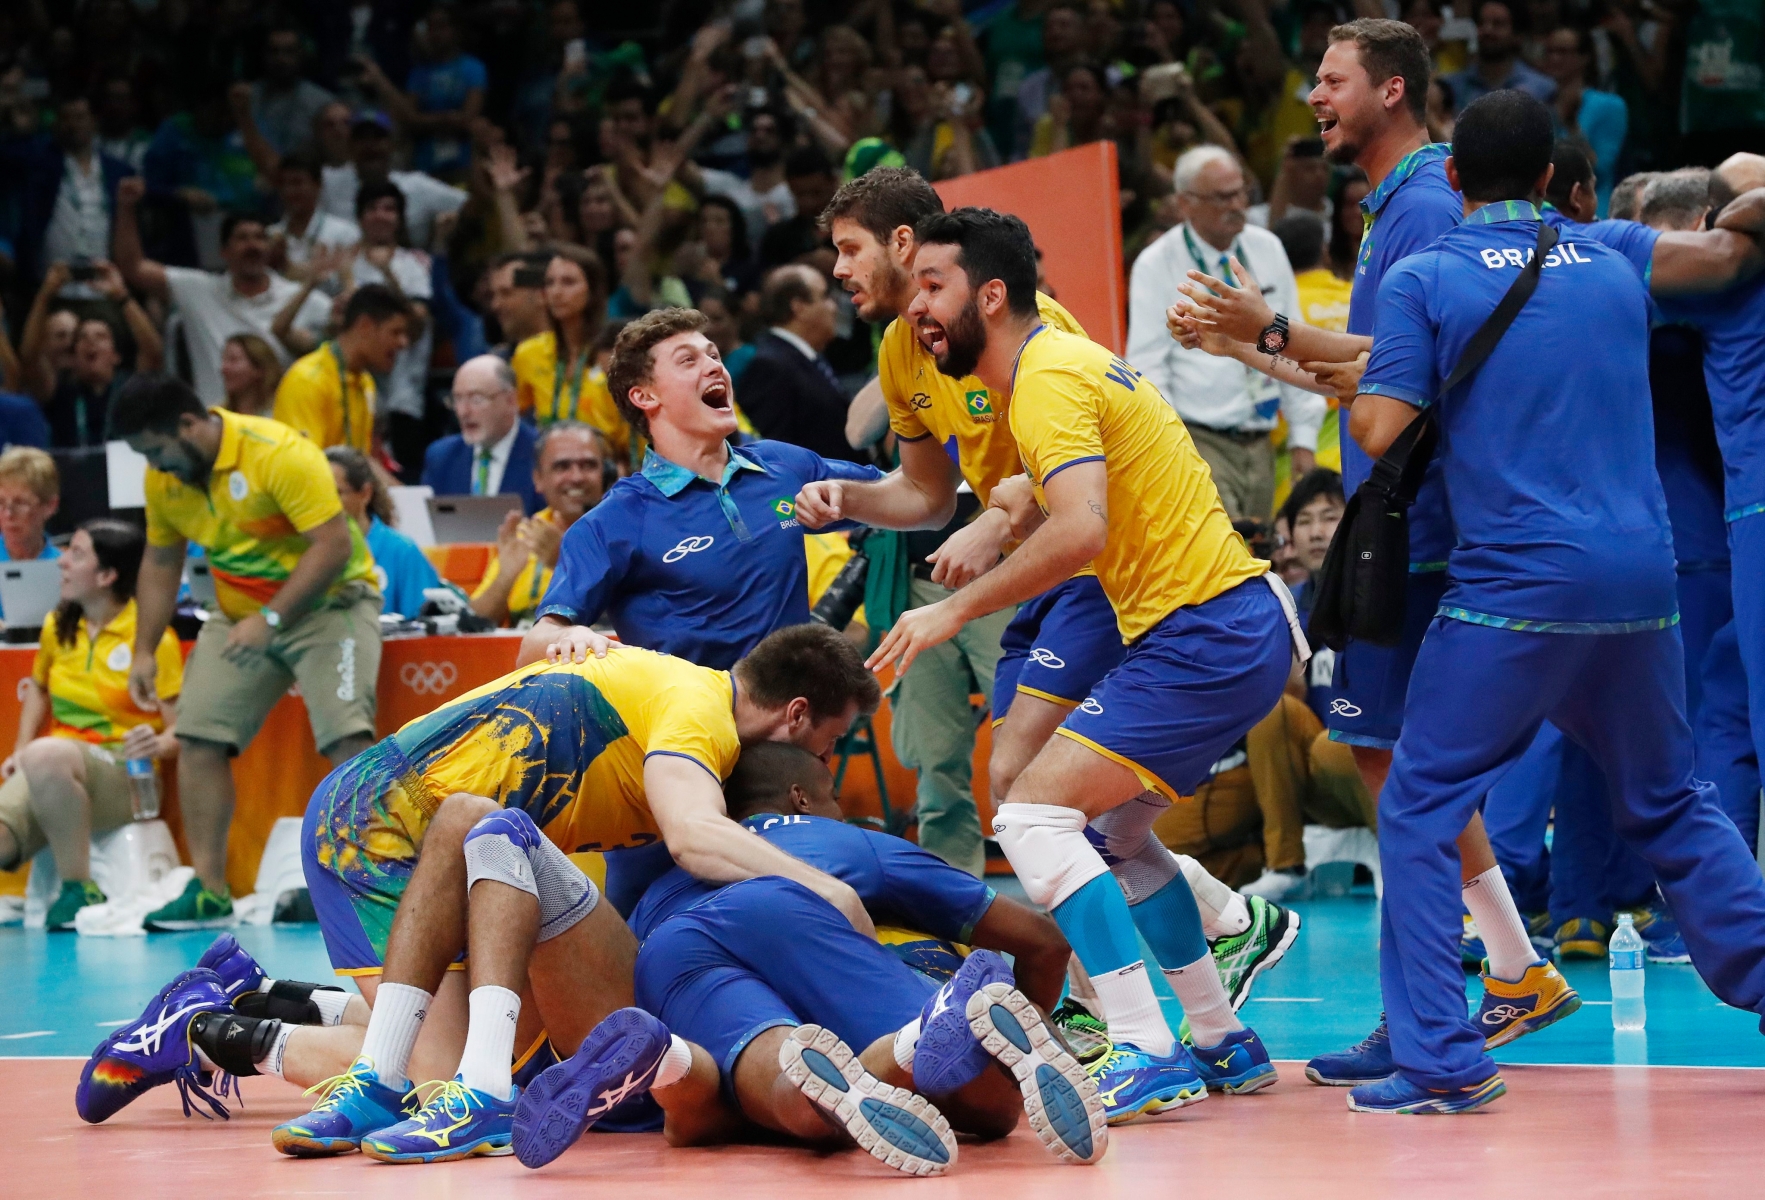 epa05505351 The Brazilian team celebrates after winning the men's Volleyball final between Brazil and Italy of the Rio 2016 Olympic Games at Maracanazinho indoor arena in Rio de Janeiro, Brazil, 21 August 2016.  EPA/JAVIER ETXEZARRETA BRAZIL RIO 2016 OLYMPIC GAMES